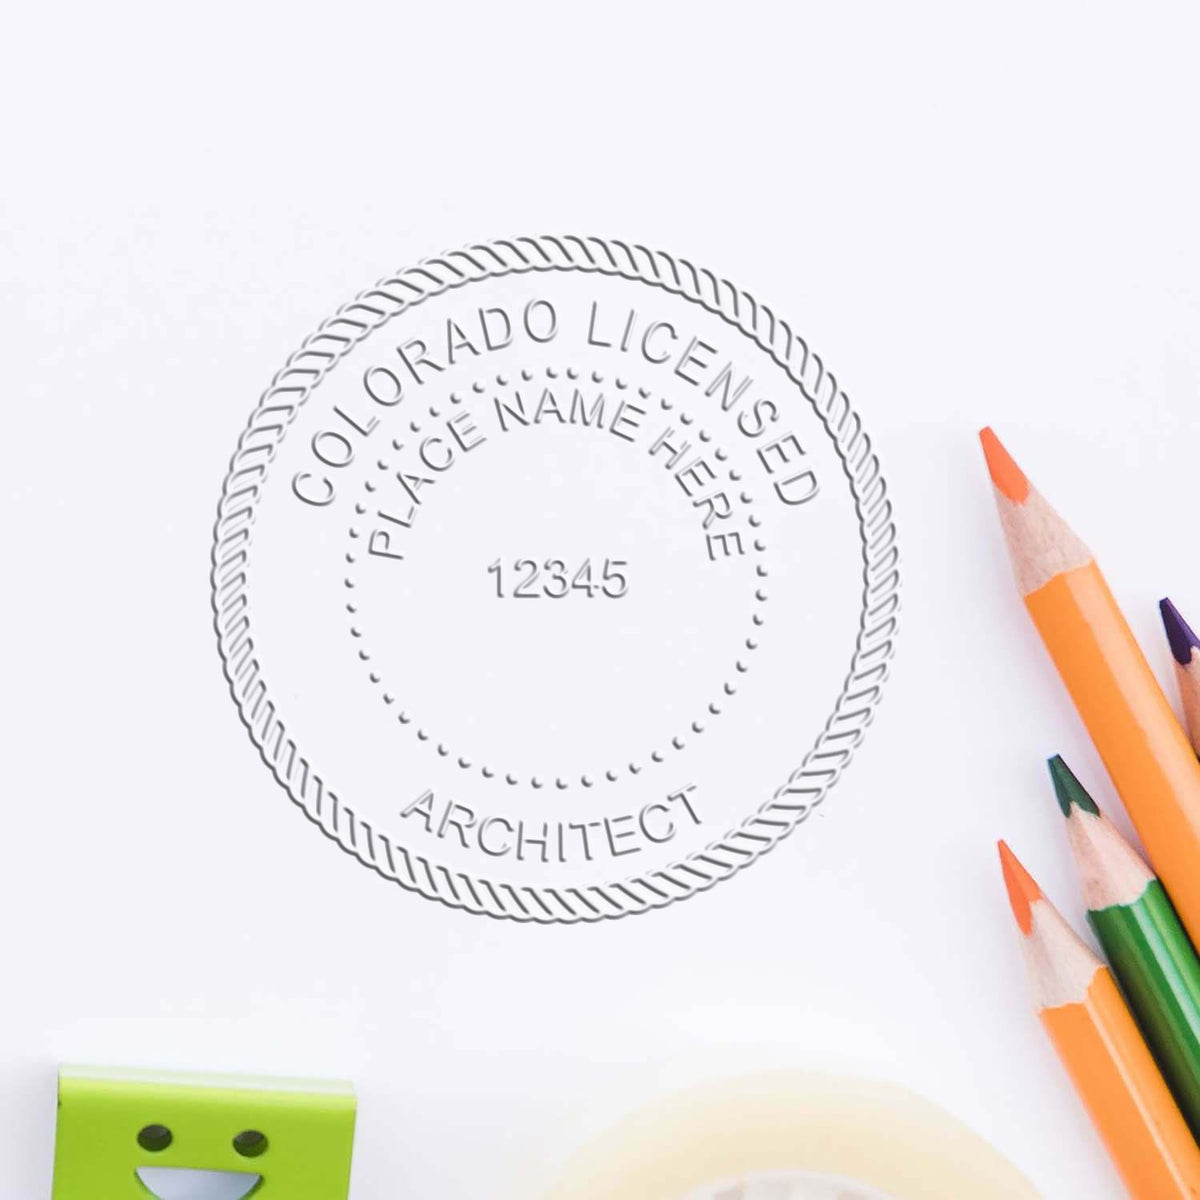 This paper is stamped with a sample imprint of the Extended Long Reach Colorado Architect Seal Embosser, signifying its quality and reliability.